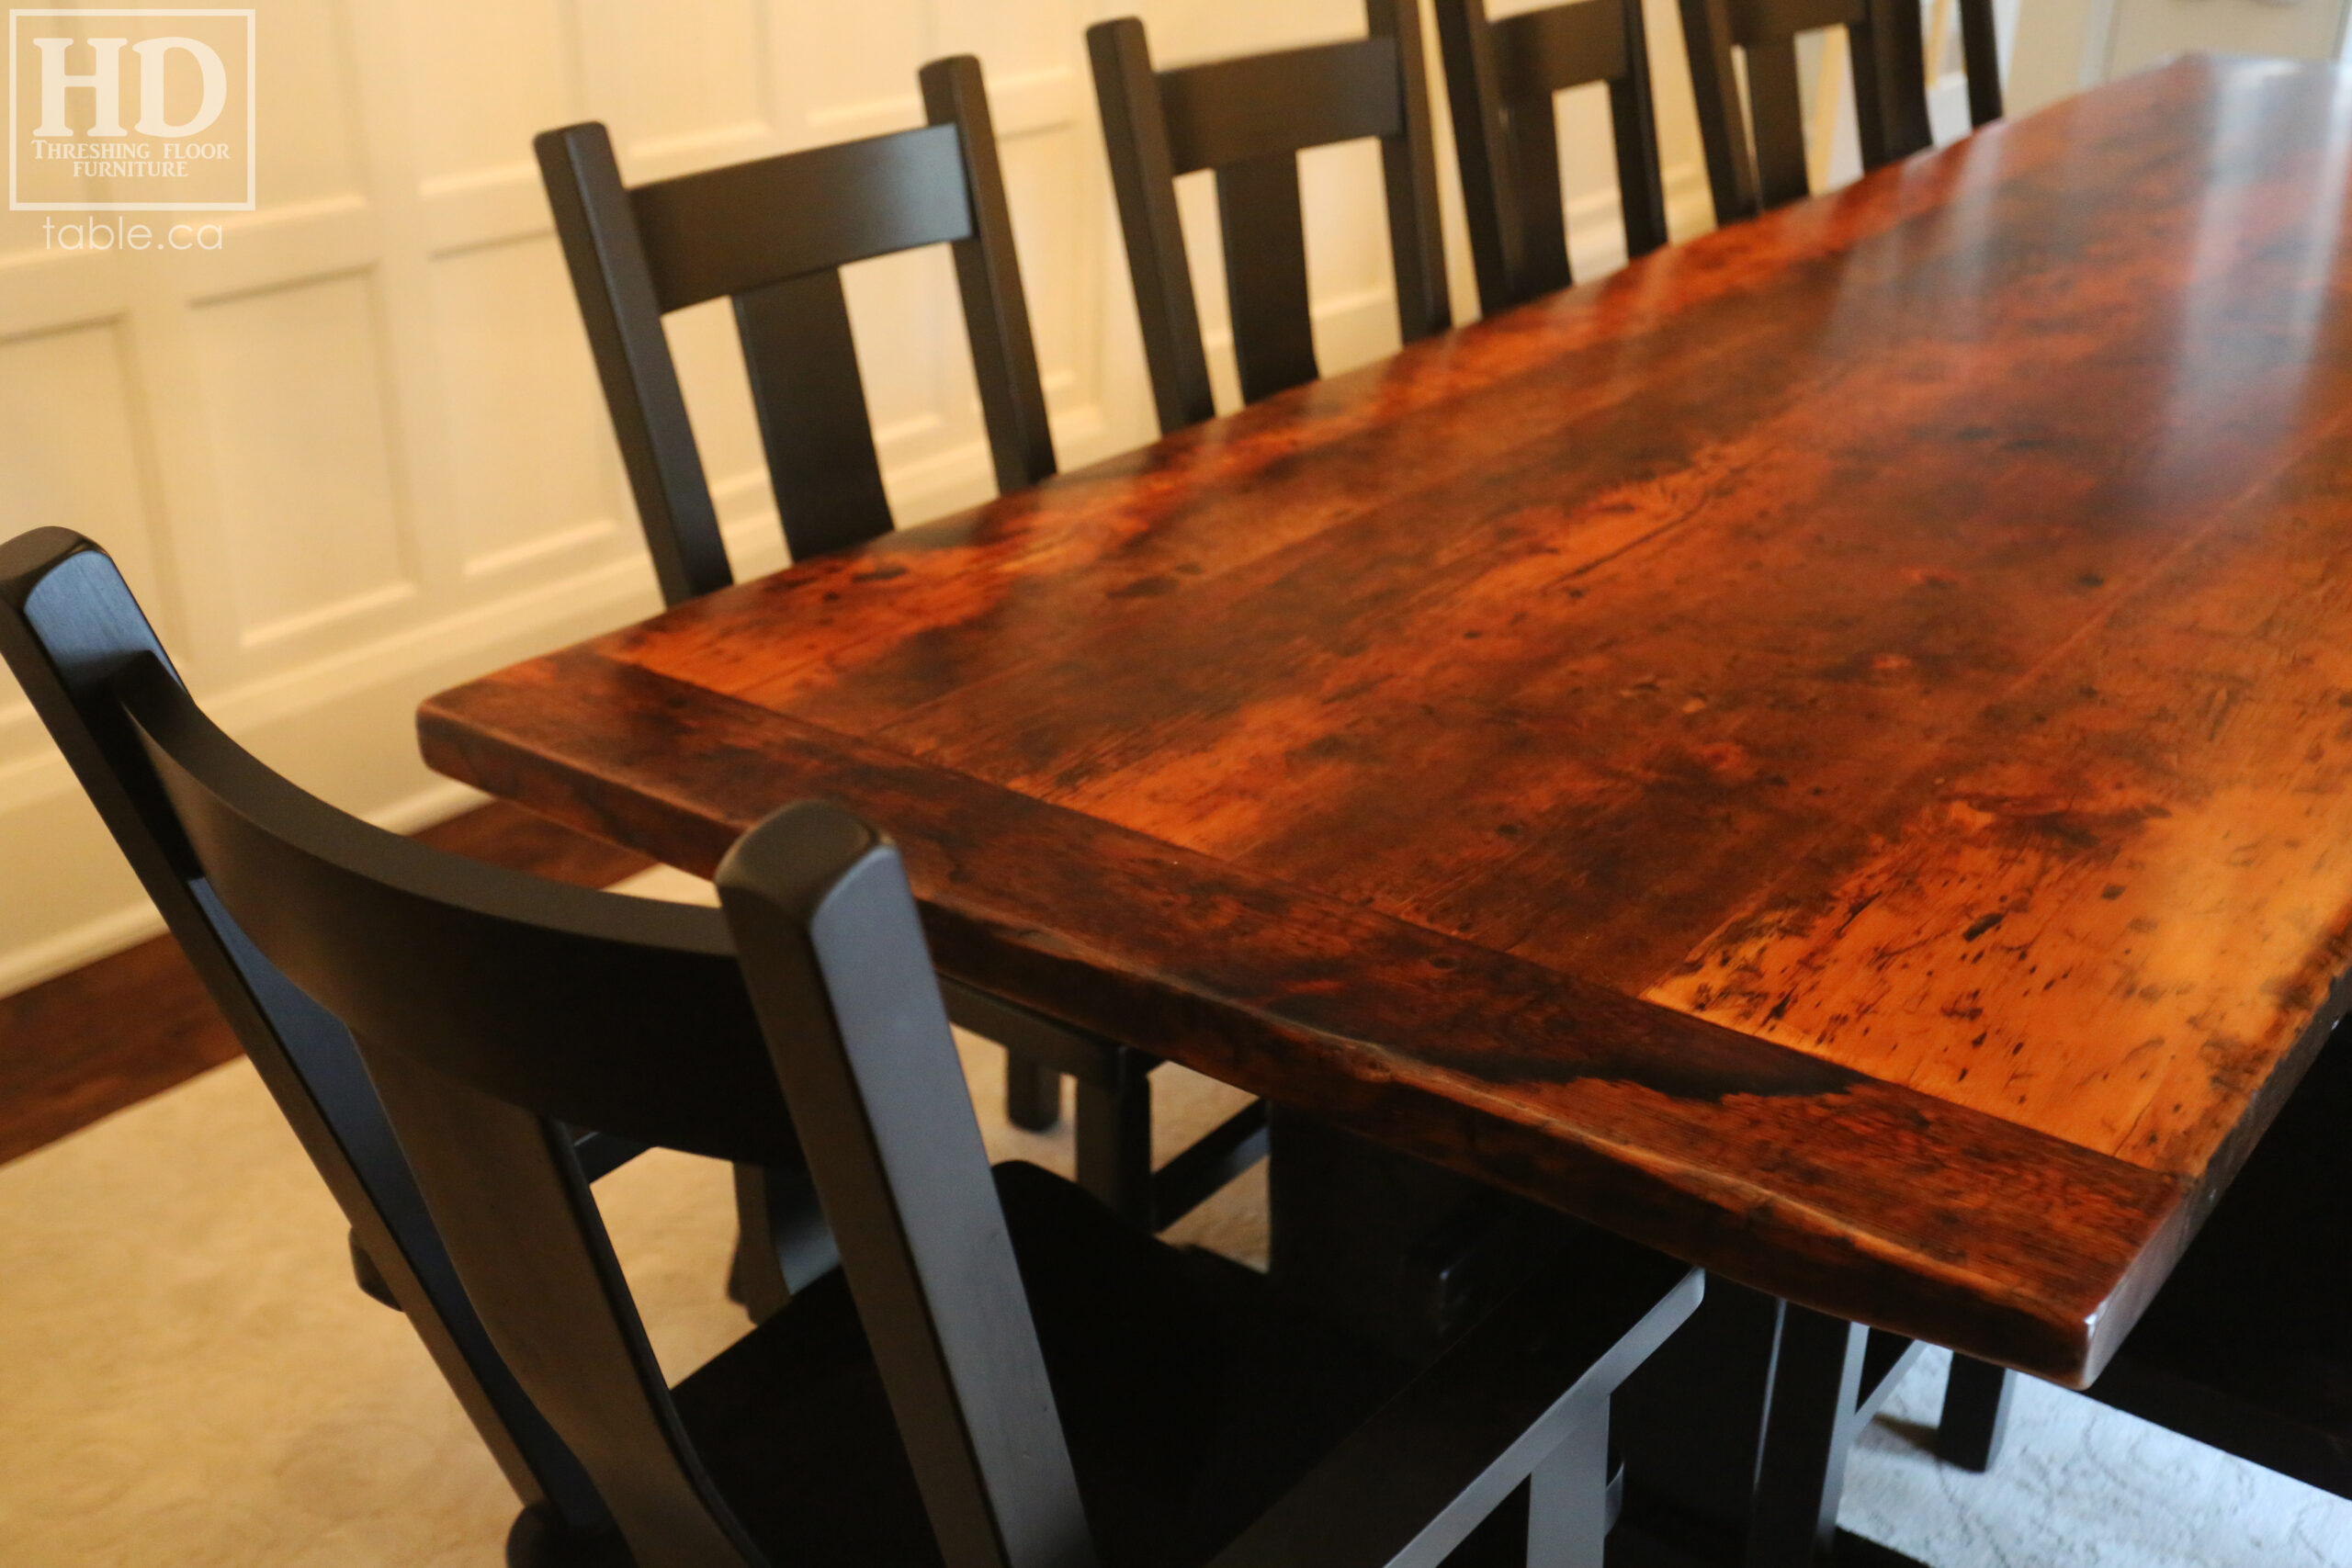 12' Reclaimed Wood Table for a Port Dover home - 42" wide - Trestle Base - 2" Old Growth Pine Threshing Floor Construction - Original edges & distressing maintained - Premium epoxy + satin polyurethane finish - Black Painted Base - 12 Plank Back Chairs / Wormy Maple - Painted Solid Black / Satin polyurethane clearcoat finish - www.table.ca